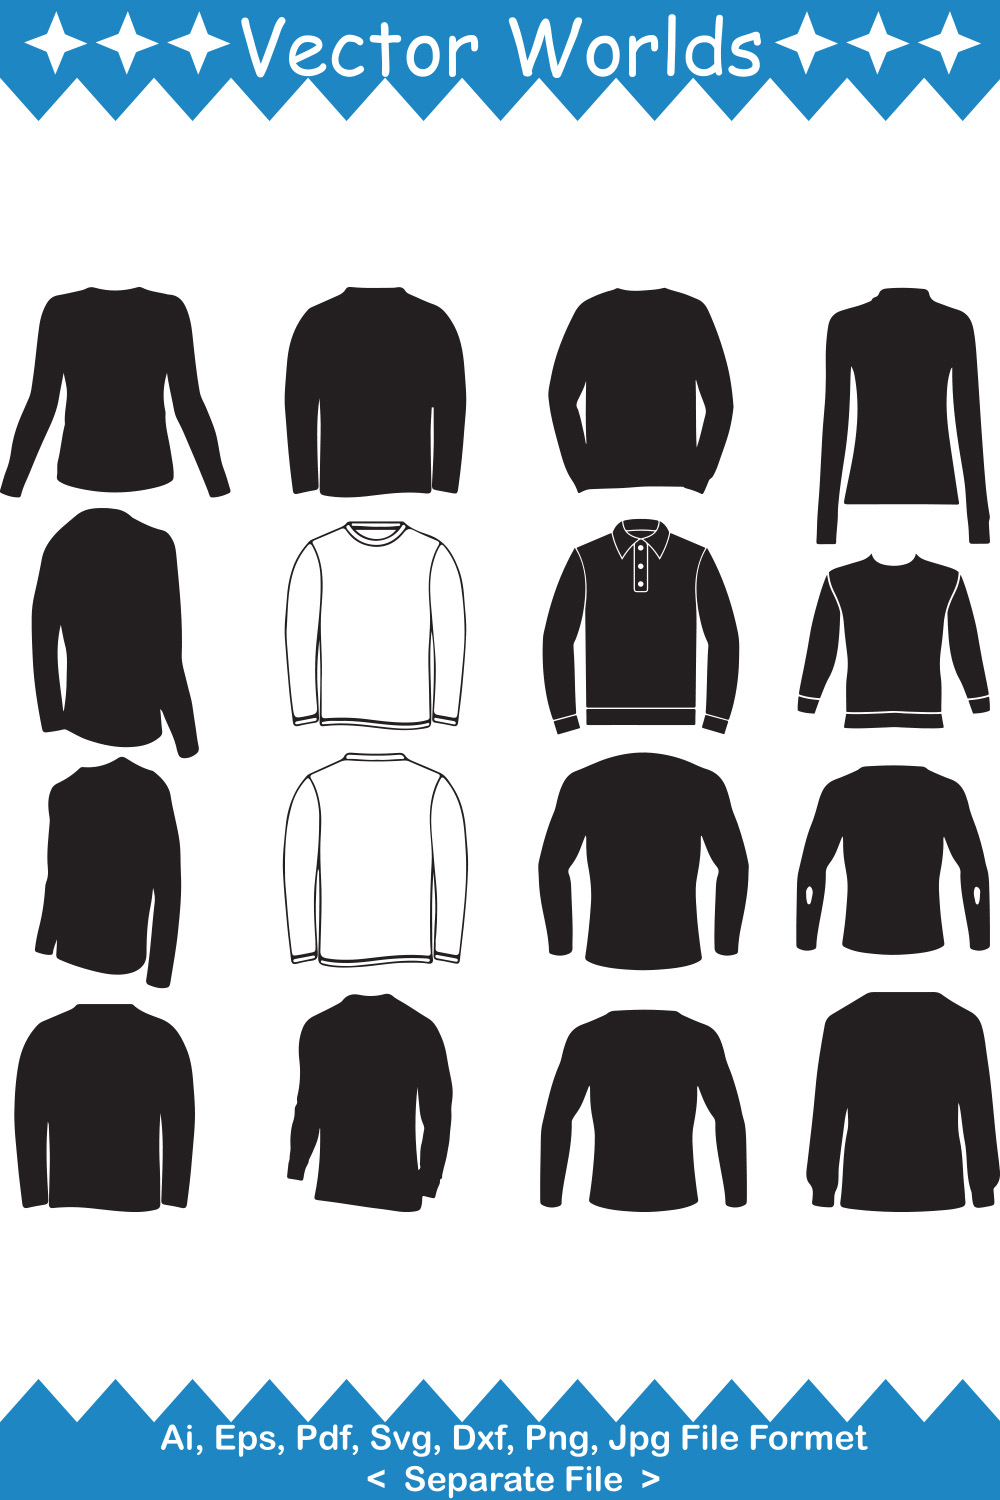 A pack of vector exquisite turtleneck silhouette images.